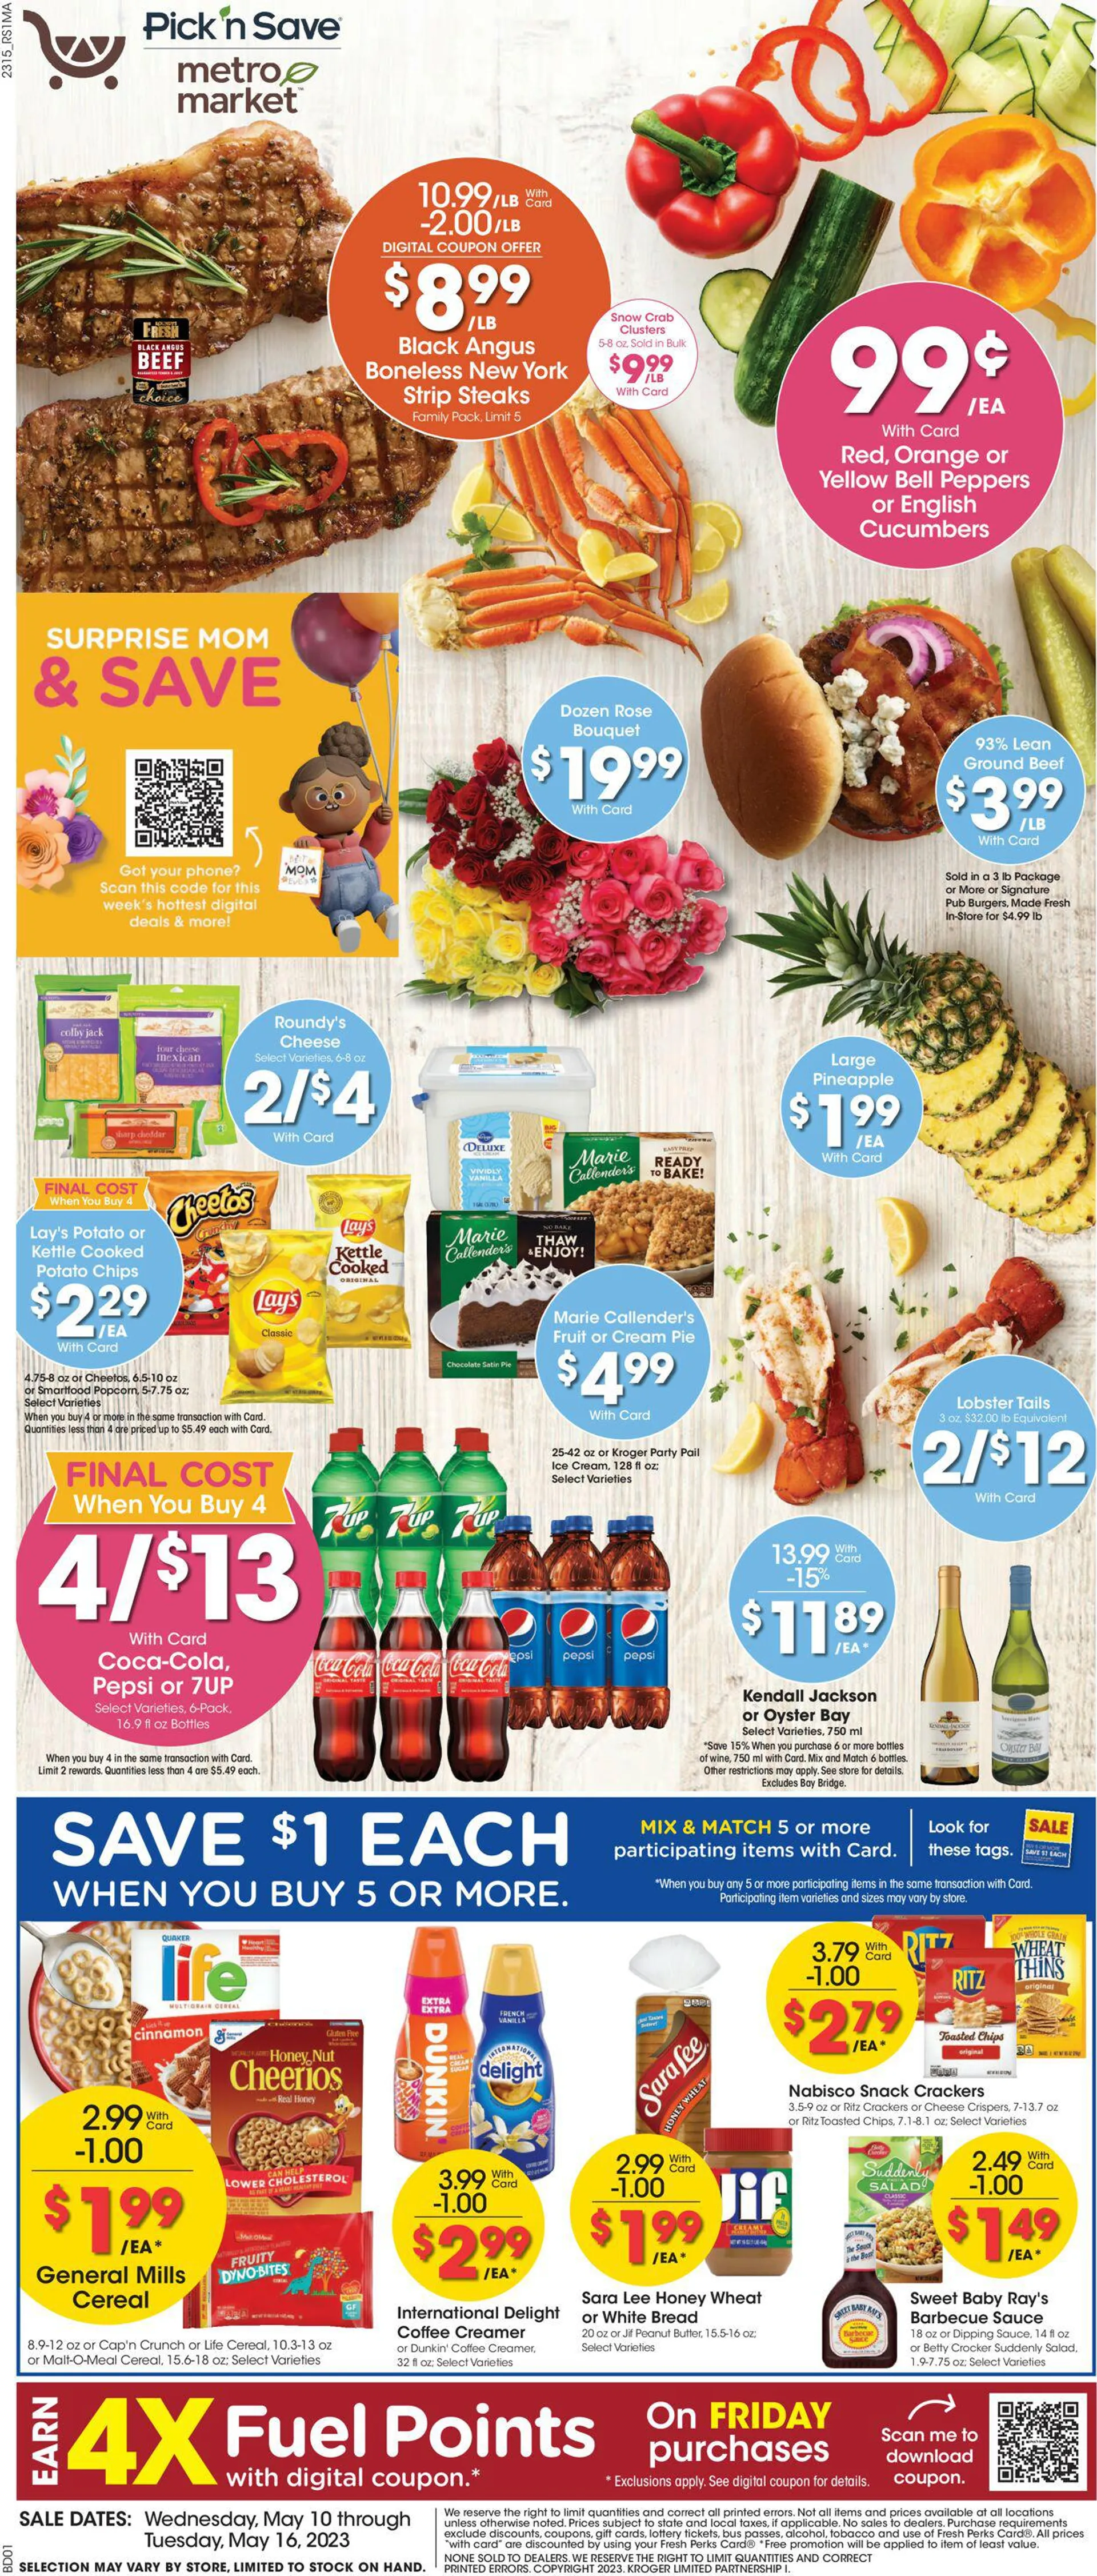 Metro Market Current weekly ad - 1